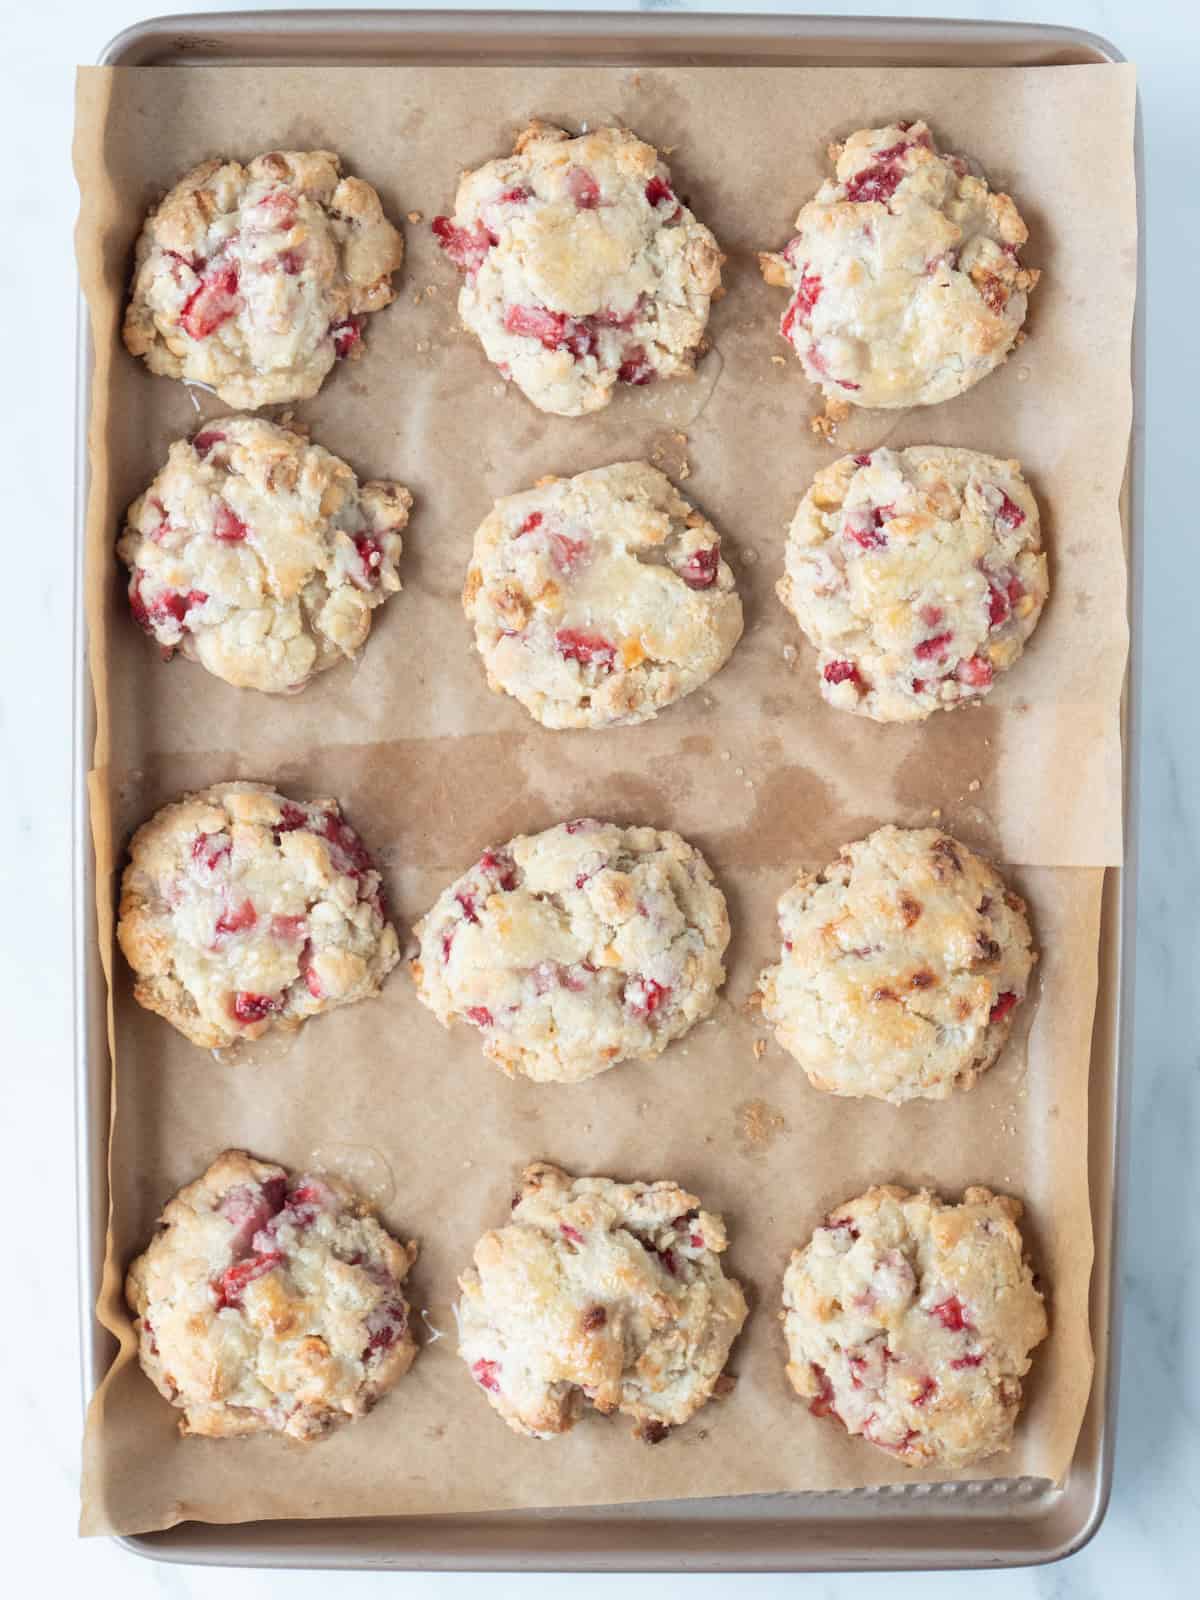 A baking sheet lined with parchment paper with 12 freshly baked strawberry white chocolate scones.